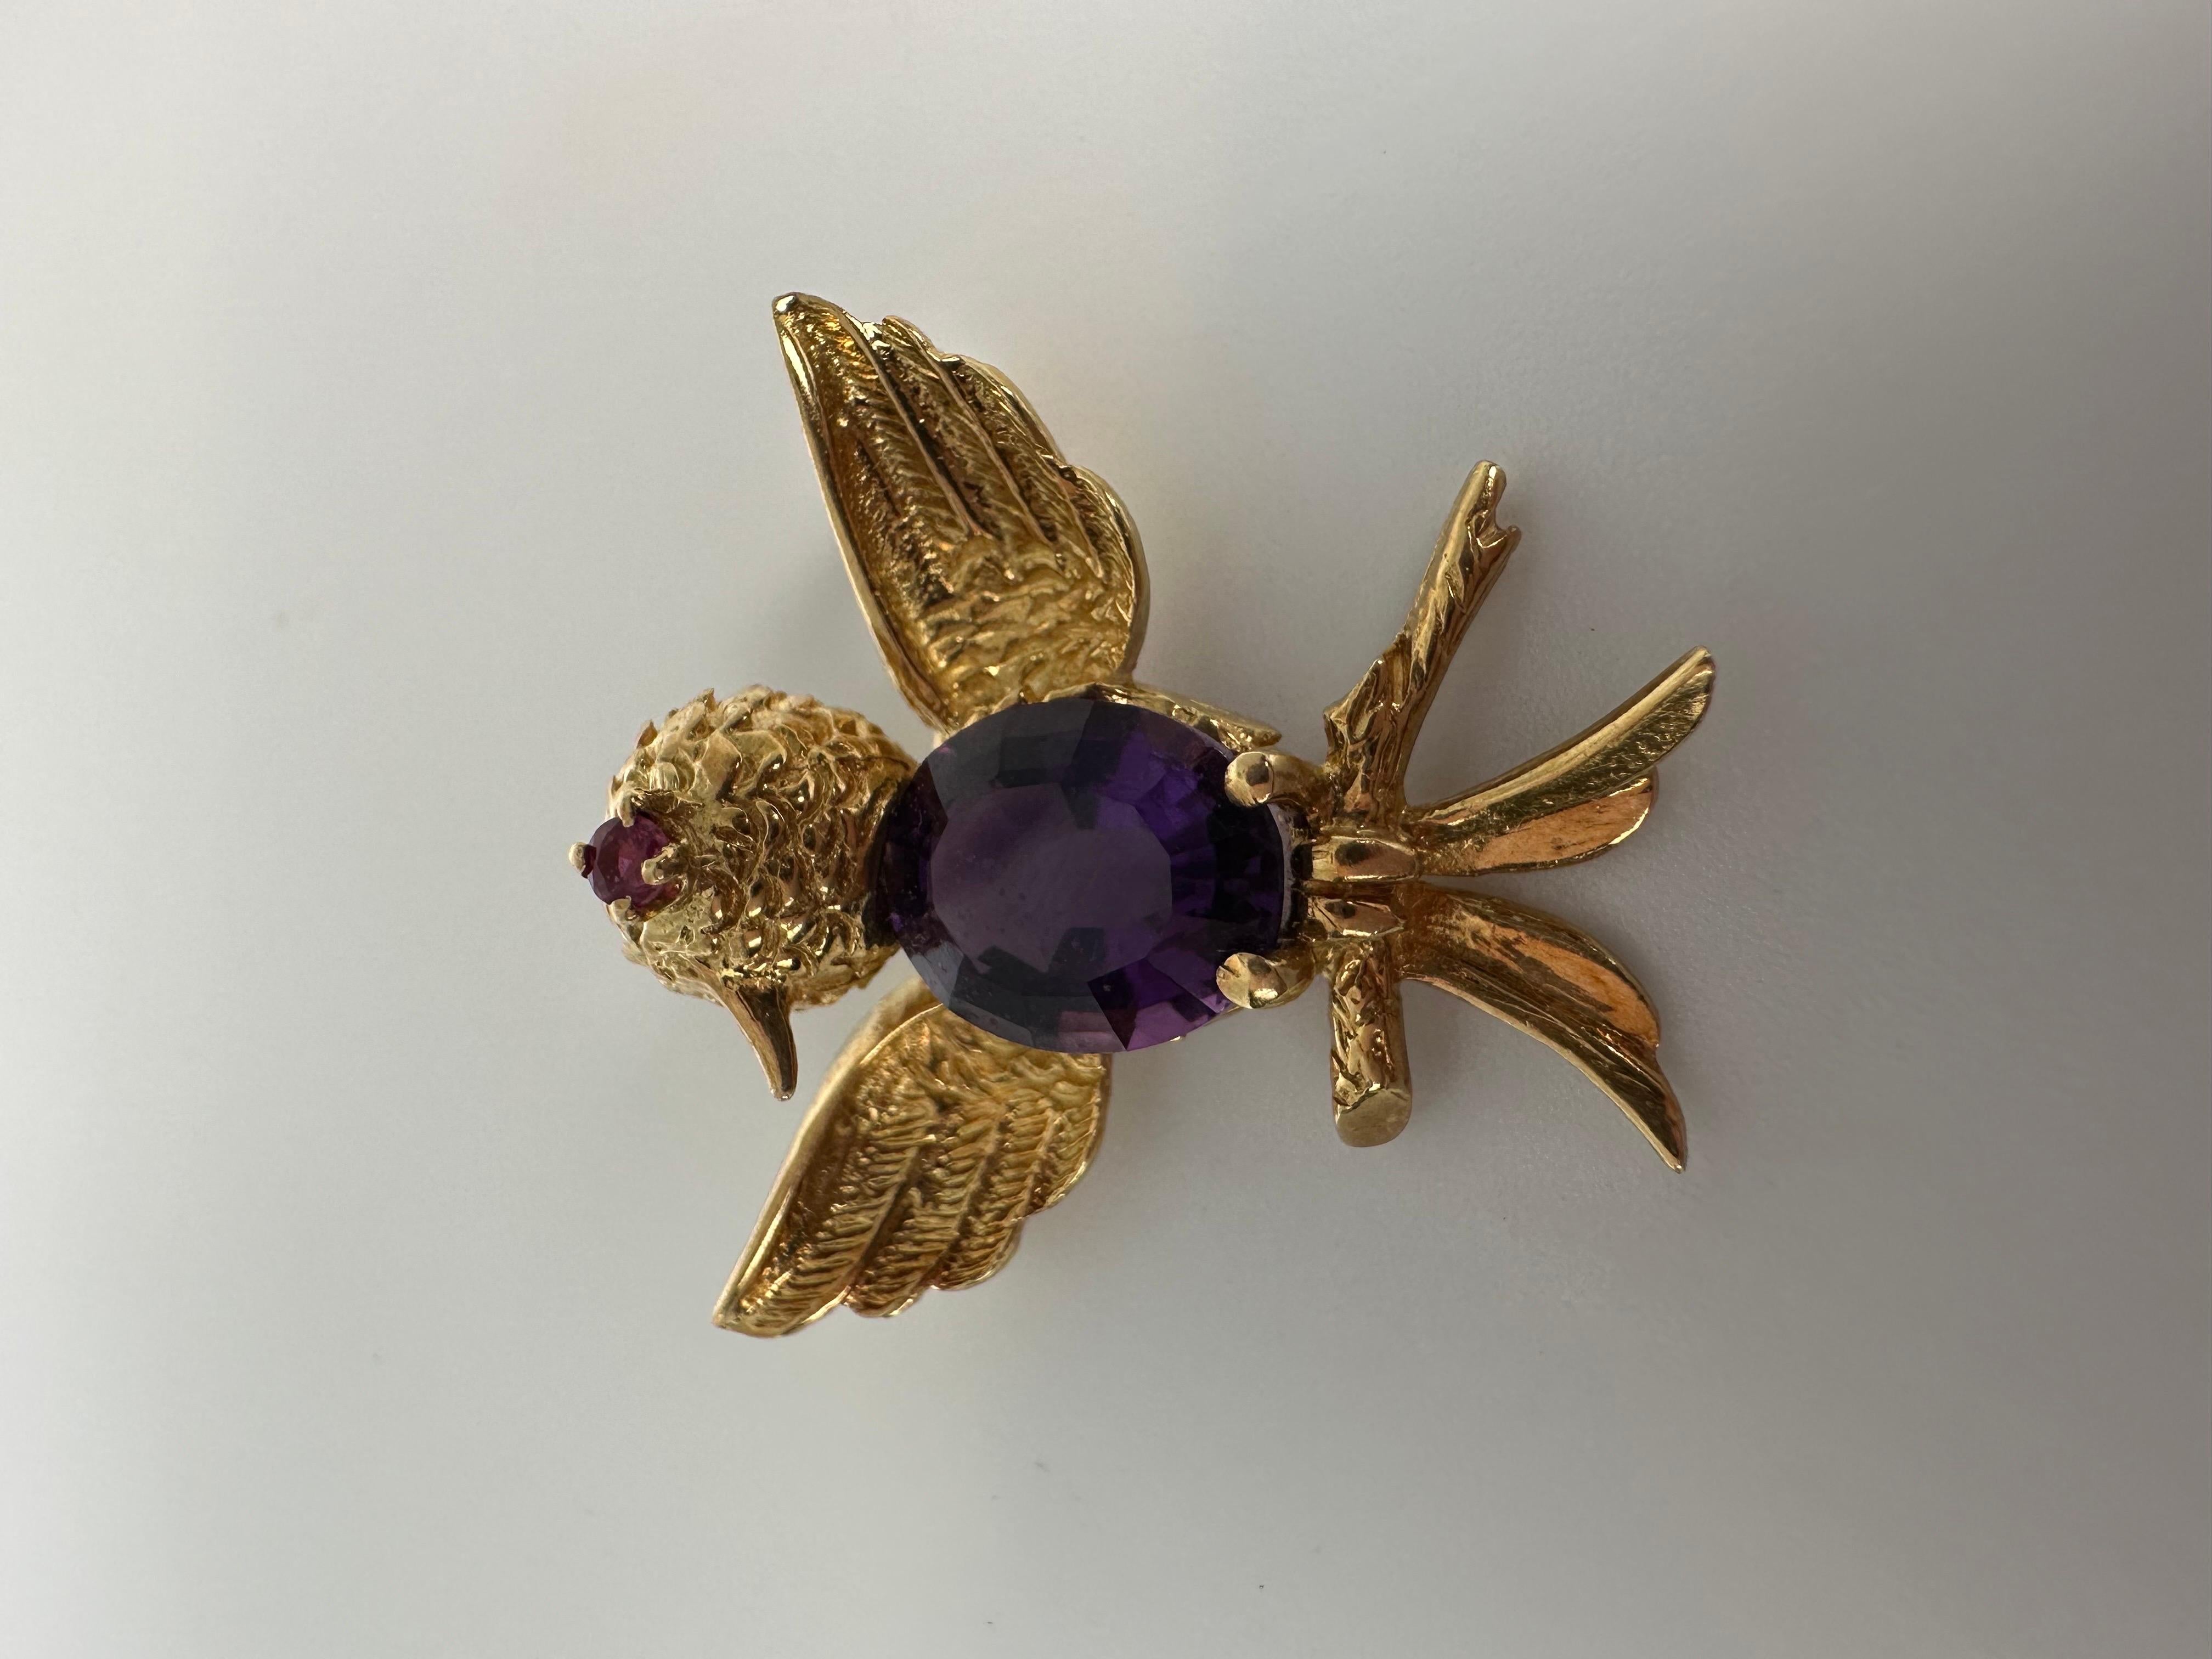 10mmx8mm amethyst in stunning brooch with a ruby eye and intricate hand design!

METAL: 18kt yellow
NATURAL AMETHYST
Clarity/Color: Slightly Included/Purple
Cut:Oval
Grams:7.09
Item18000018 kka

WHAT YOU GET AT STAMPAR JEWELERS:
Stampar Jewelers,